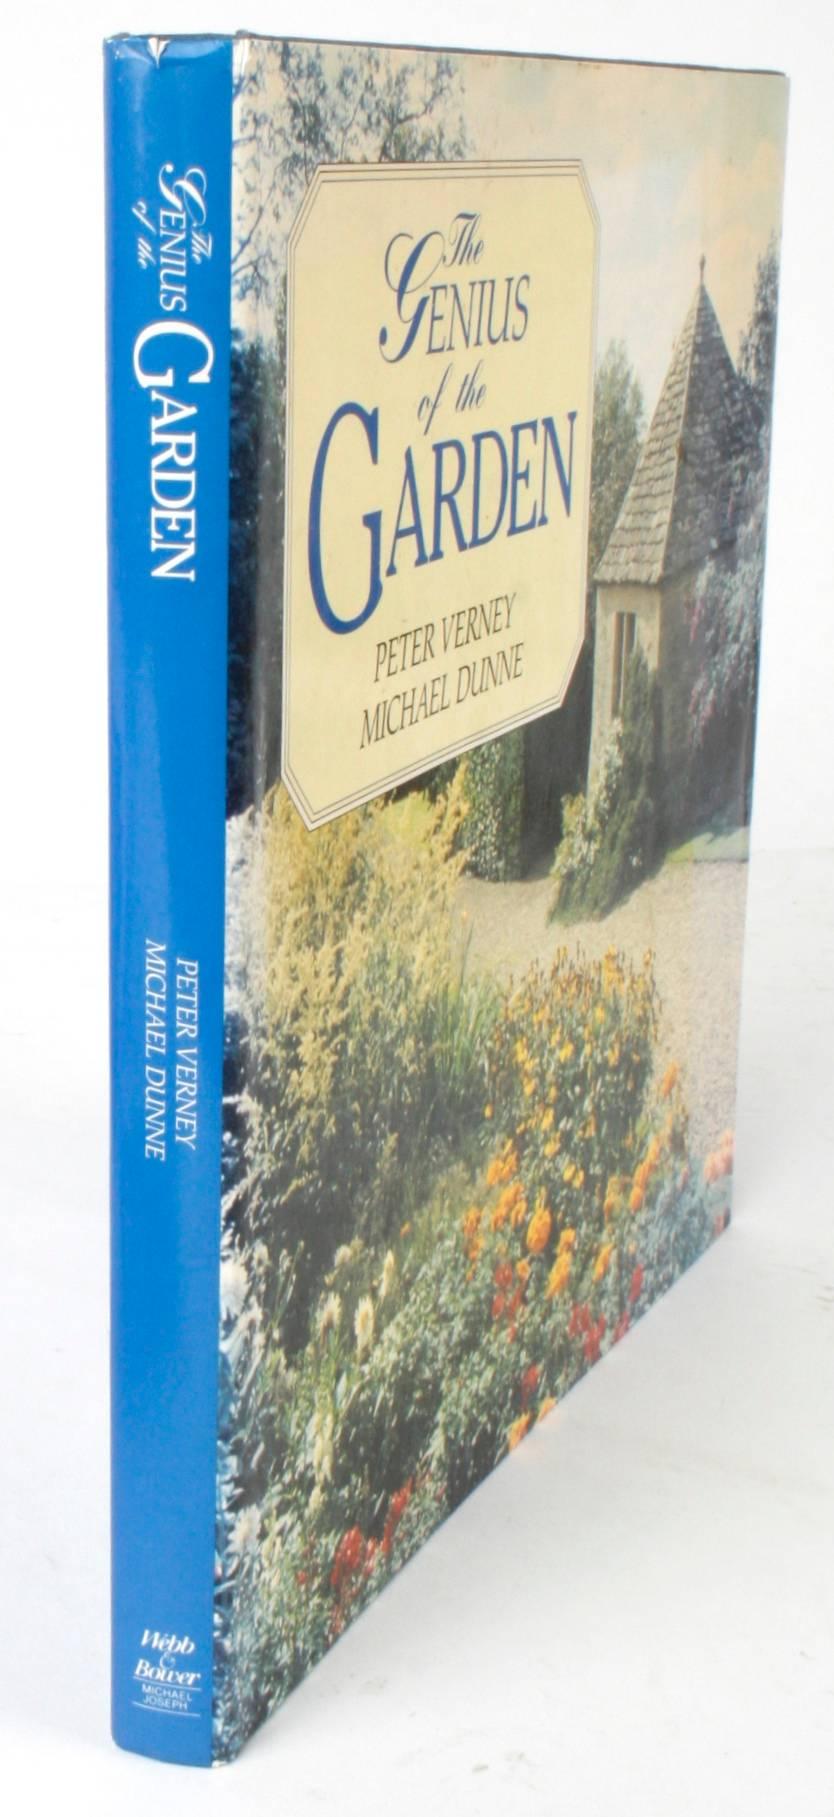 The Genius of the Garden by Peter Verney and Michael Dunne, 1st Edition For Sale 11